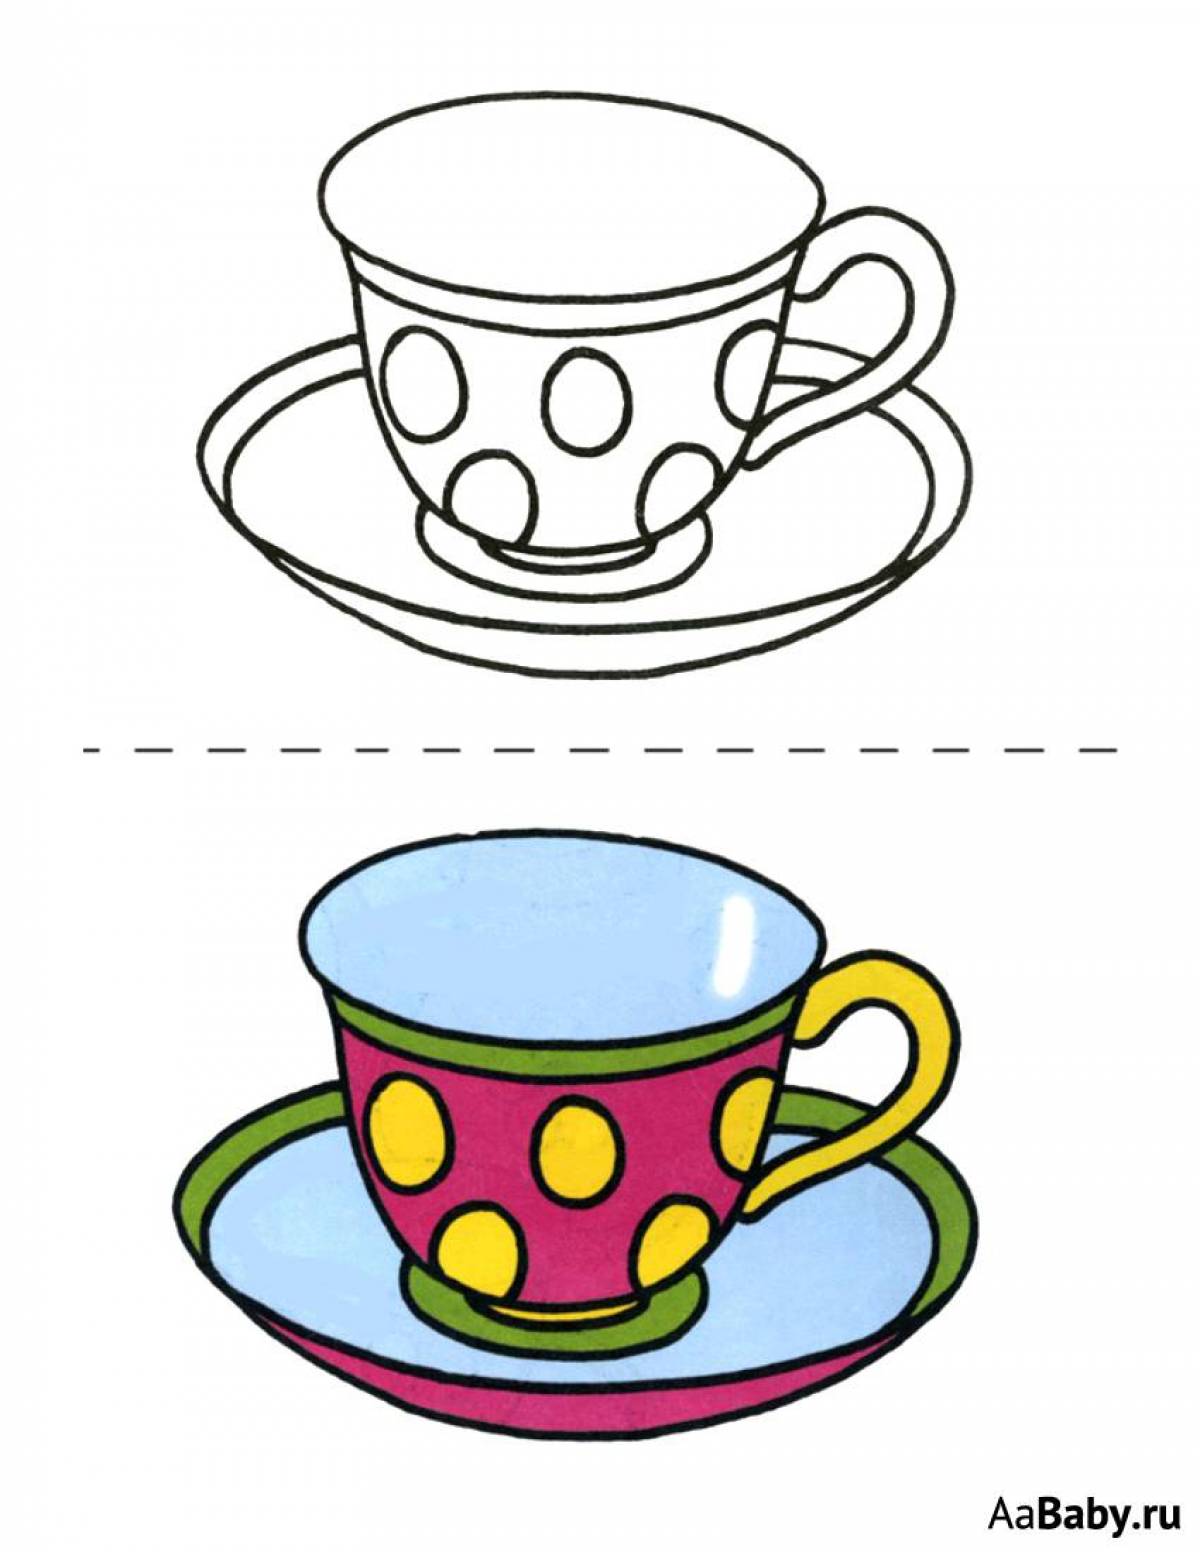 Glitter cup and saucer coloring page